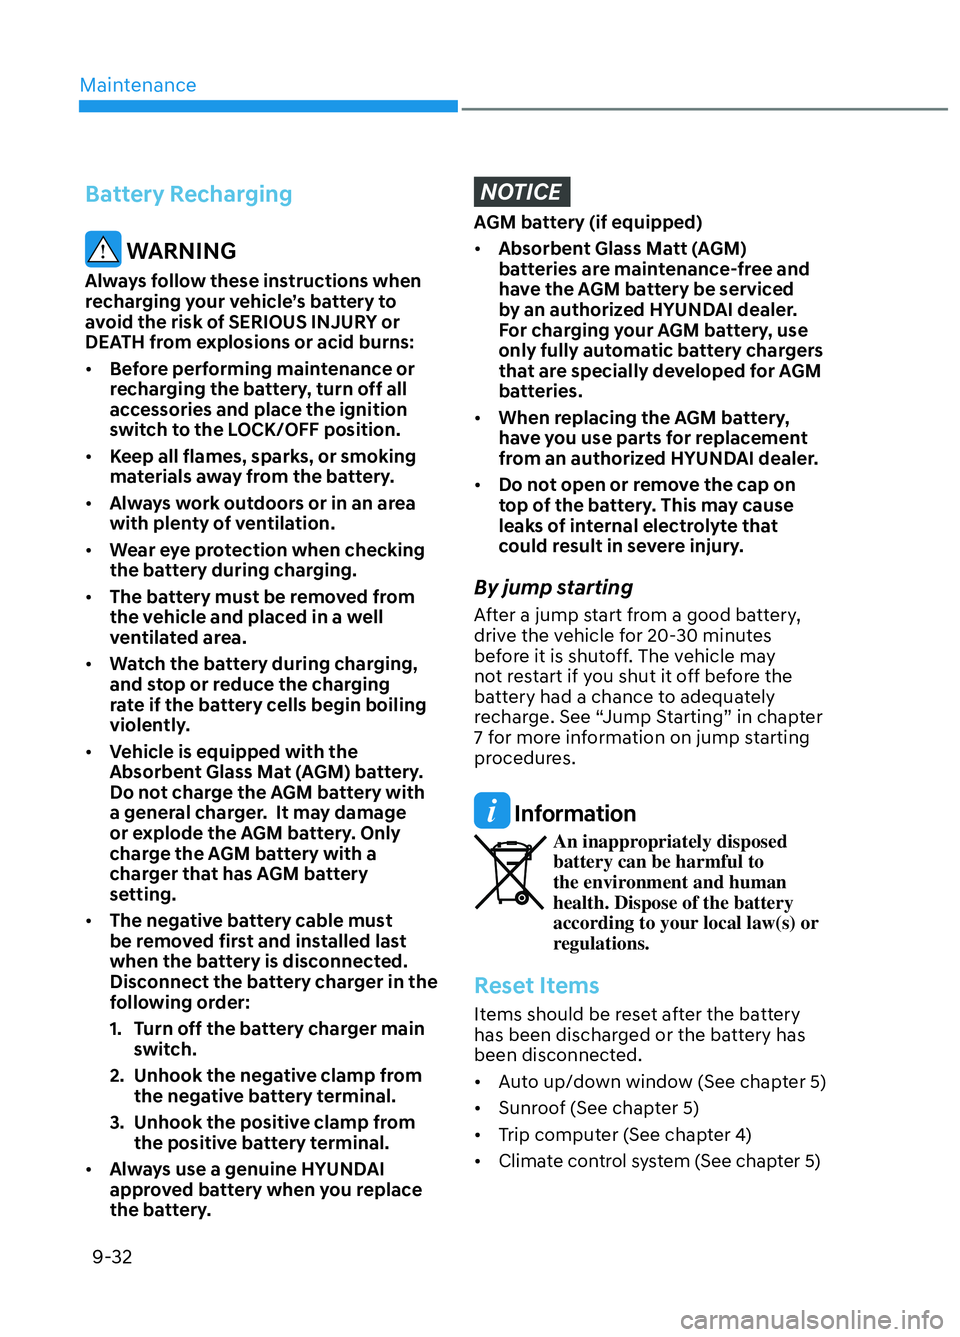 HYUNDAI ELANTRA N 2022  Owners Manual Maintenance9-32
Battery Recharging
 WARNING
Always follow these instructions when 
recharging your vehicle’s battery to 
avoid the risk of SERIOUS INJURY or 
DEATH from explosions or acid burns:
•